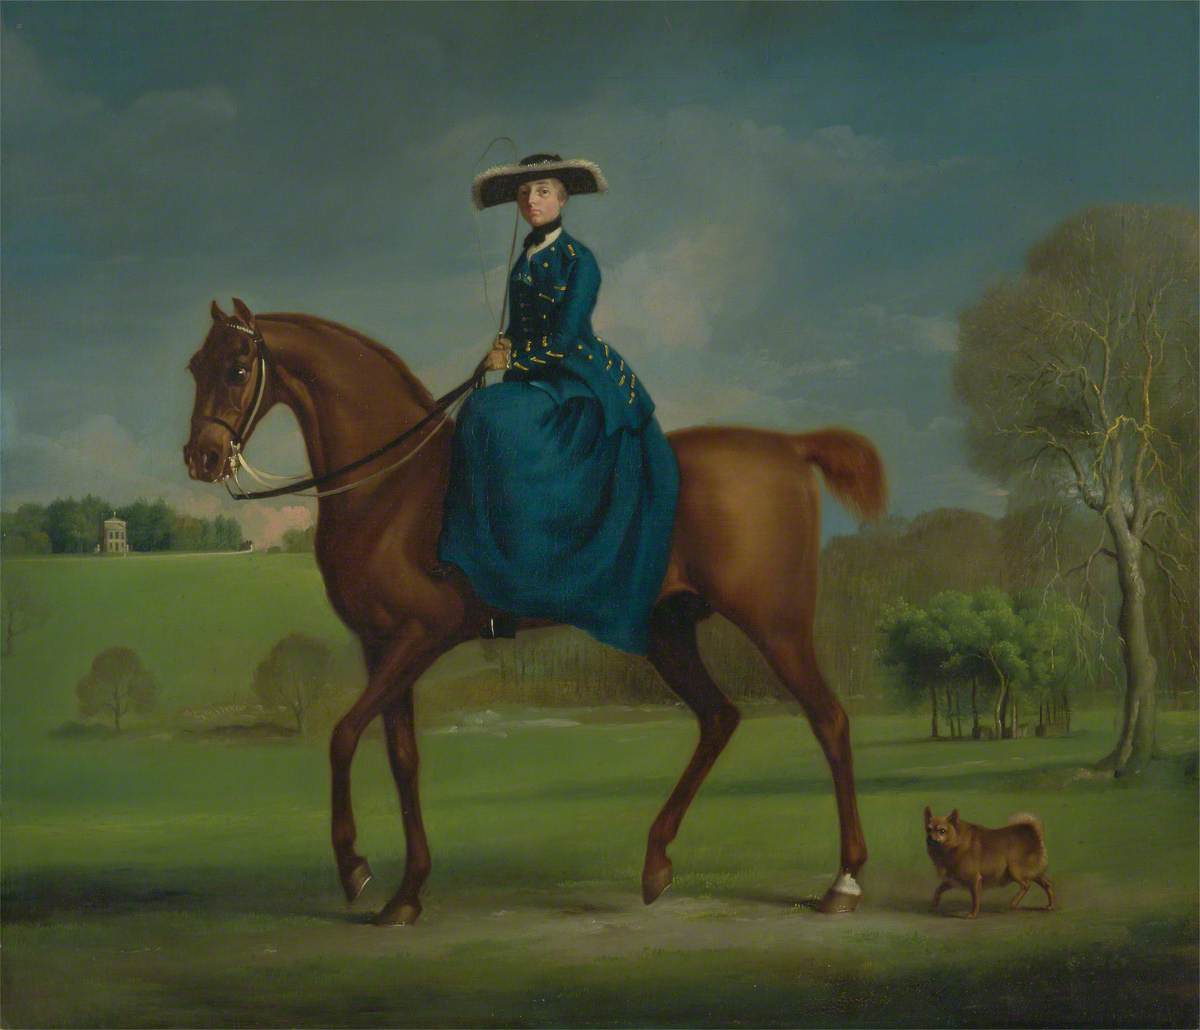 The Countess of Coningsby in the Costume of the Charlton Hunt